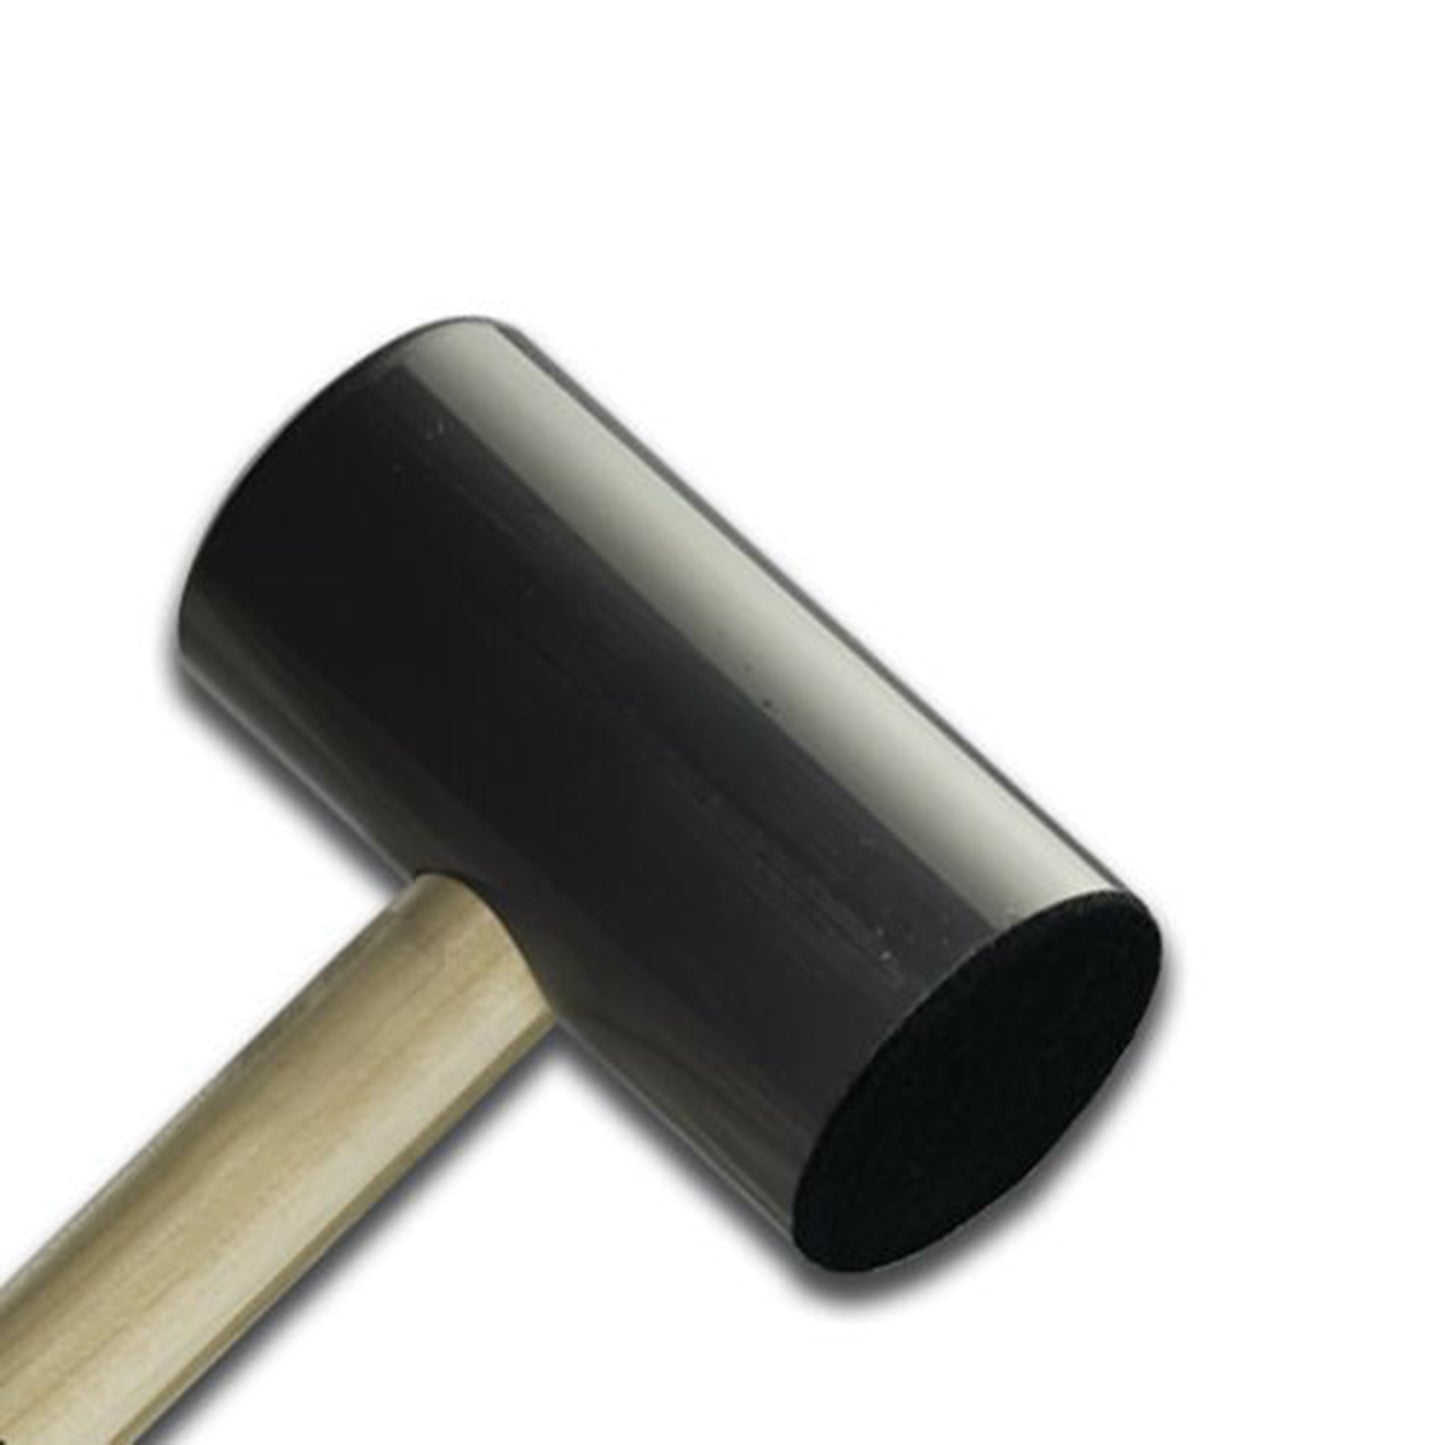 BCM3 - Large Chime Mallets